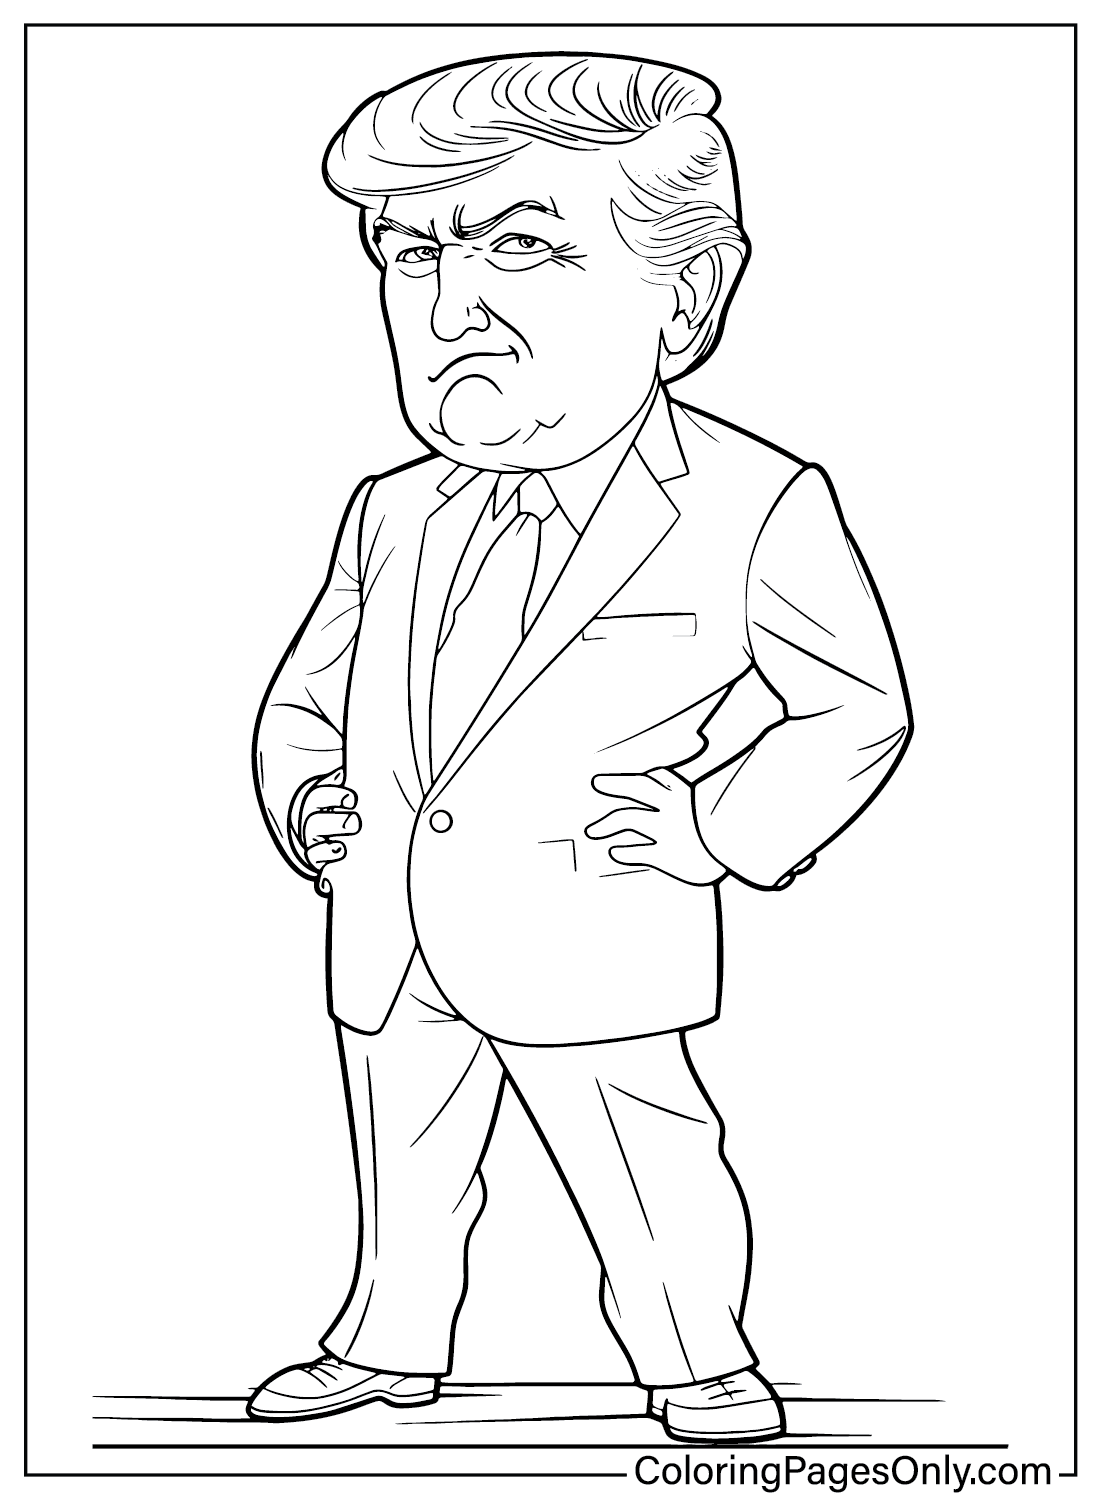 Donald Trump Coloring Page Free Printable from Donald Trump